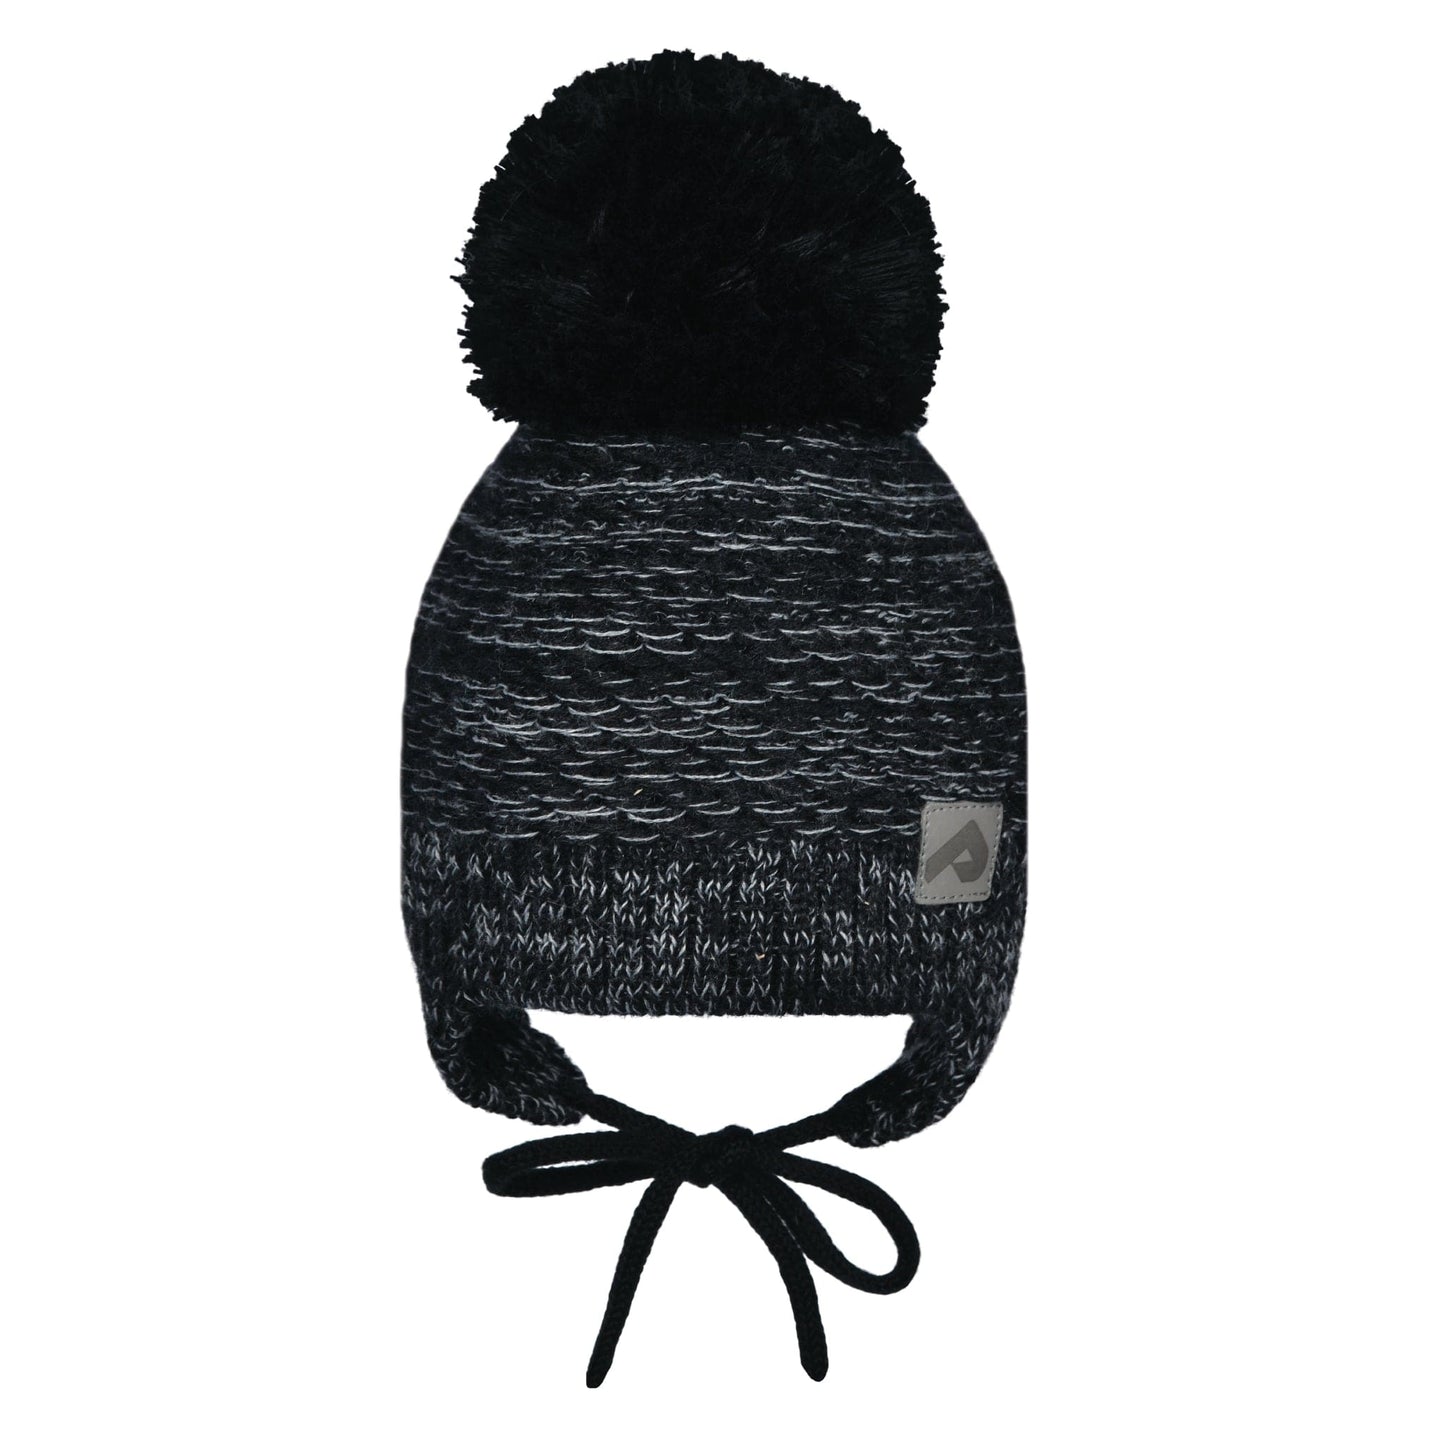 Winter hat with strings - Black & Gray